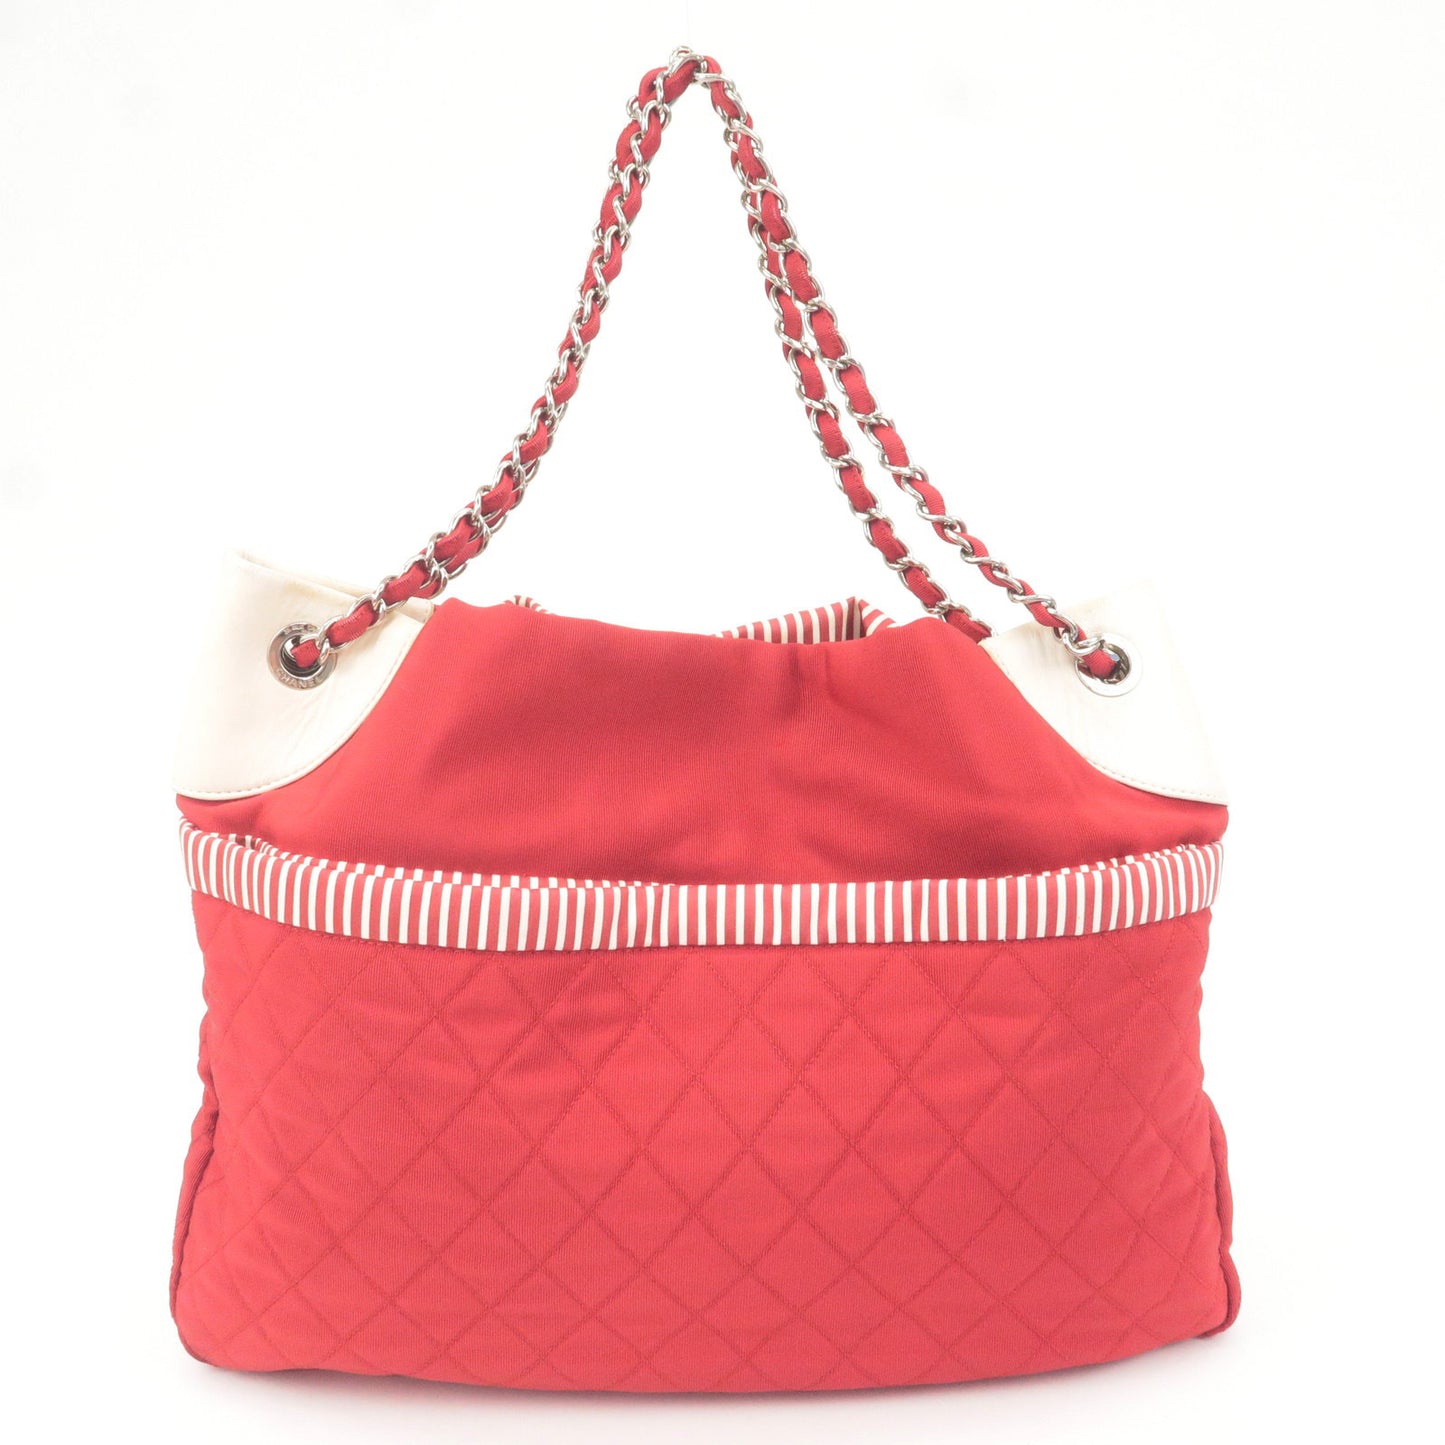 CHANEL Canvas Leather 2WAY Chain Tote Bag Stripe Red